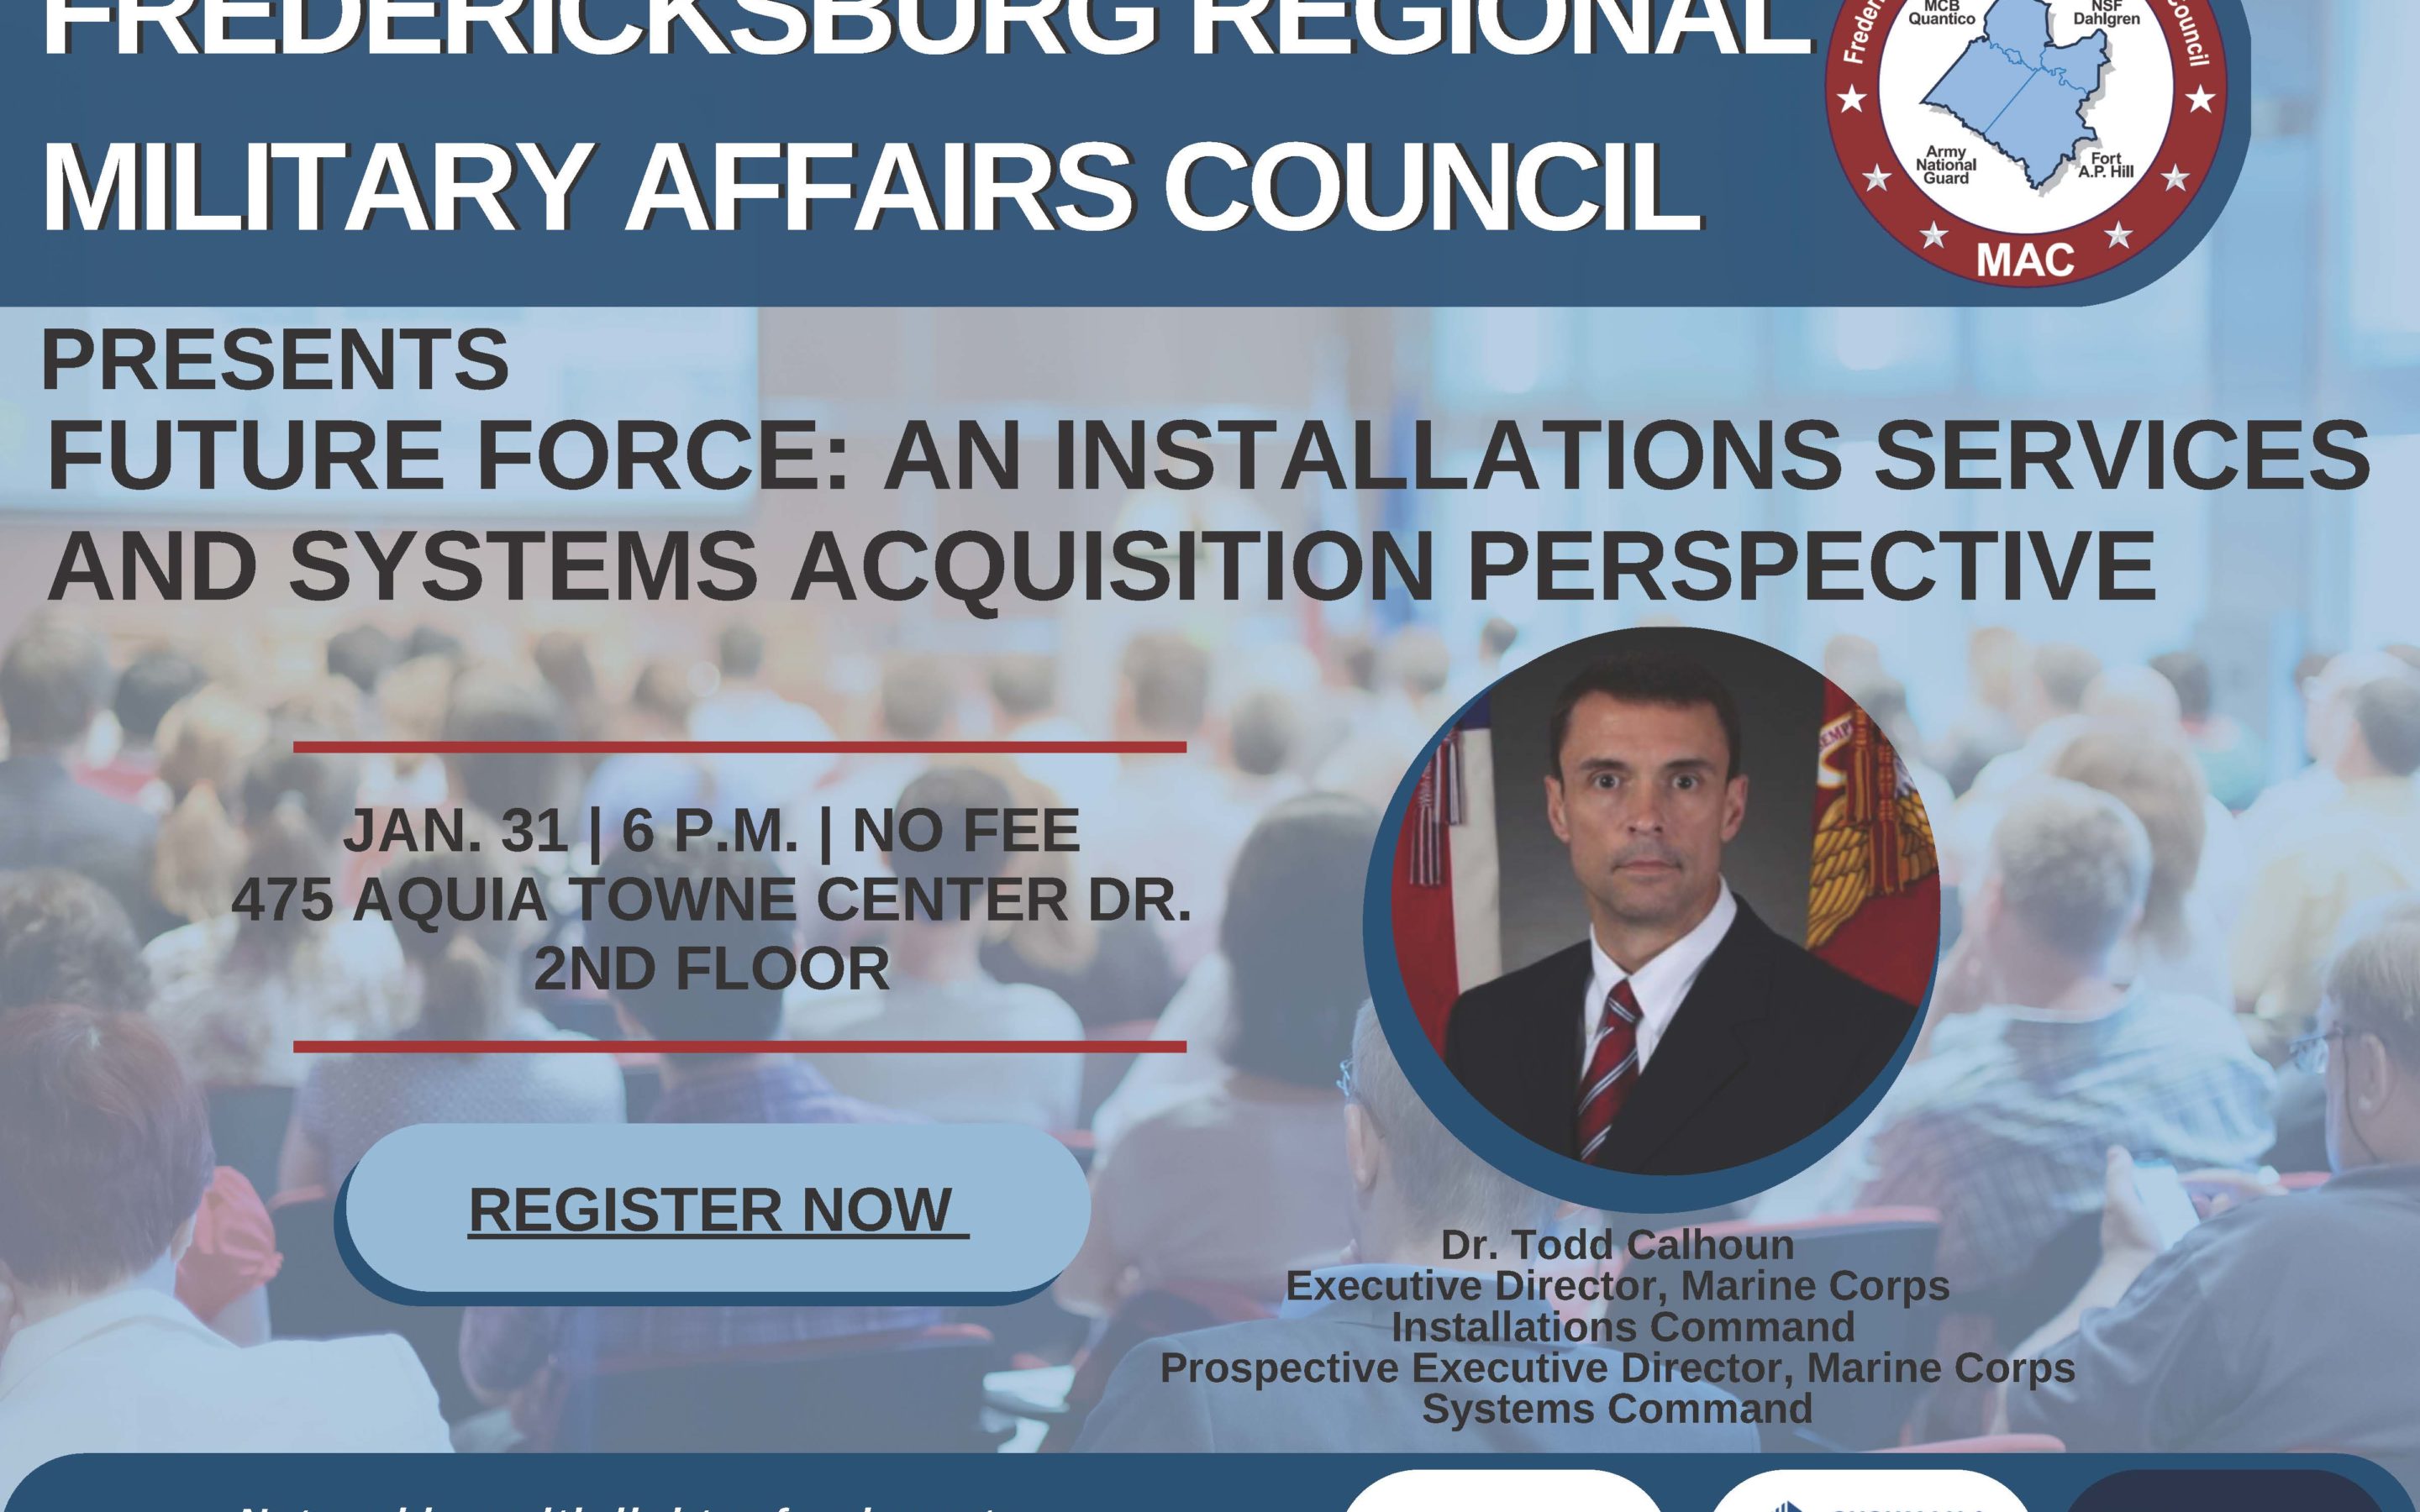 Future Force: An Installations Services and Systems Acquisition Perspective